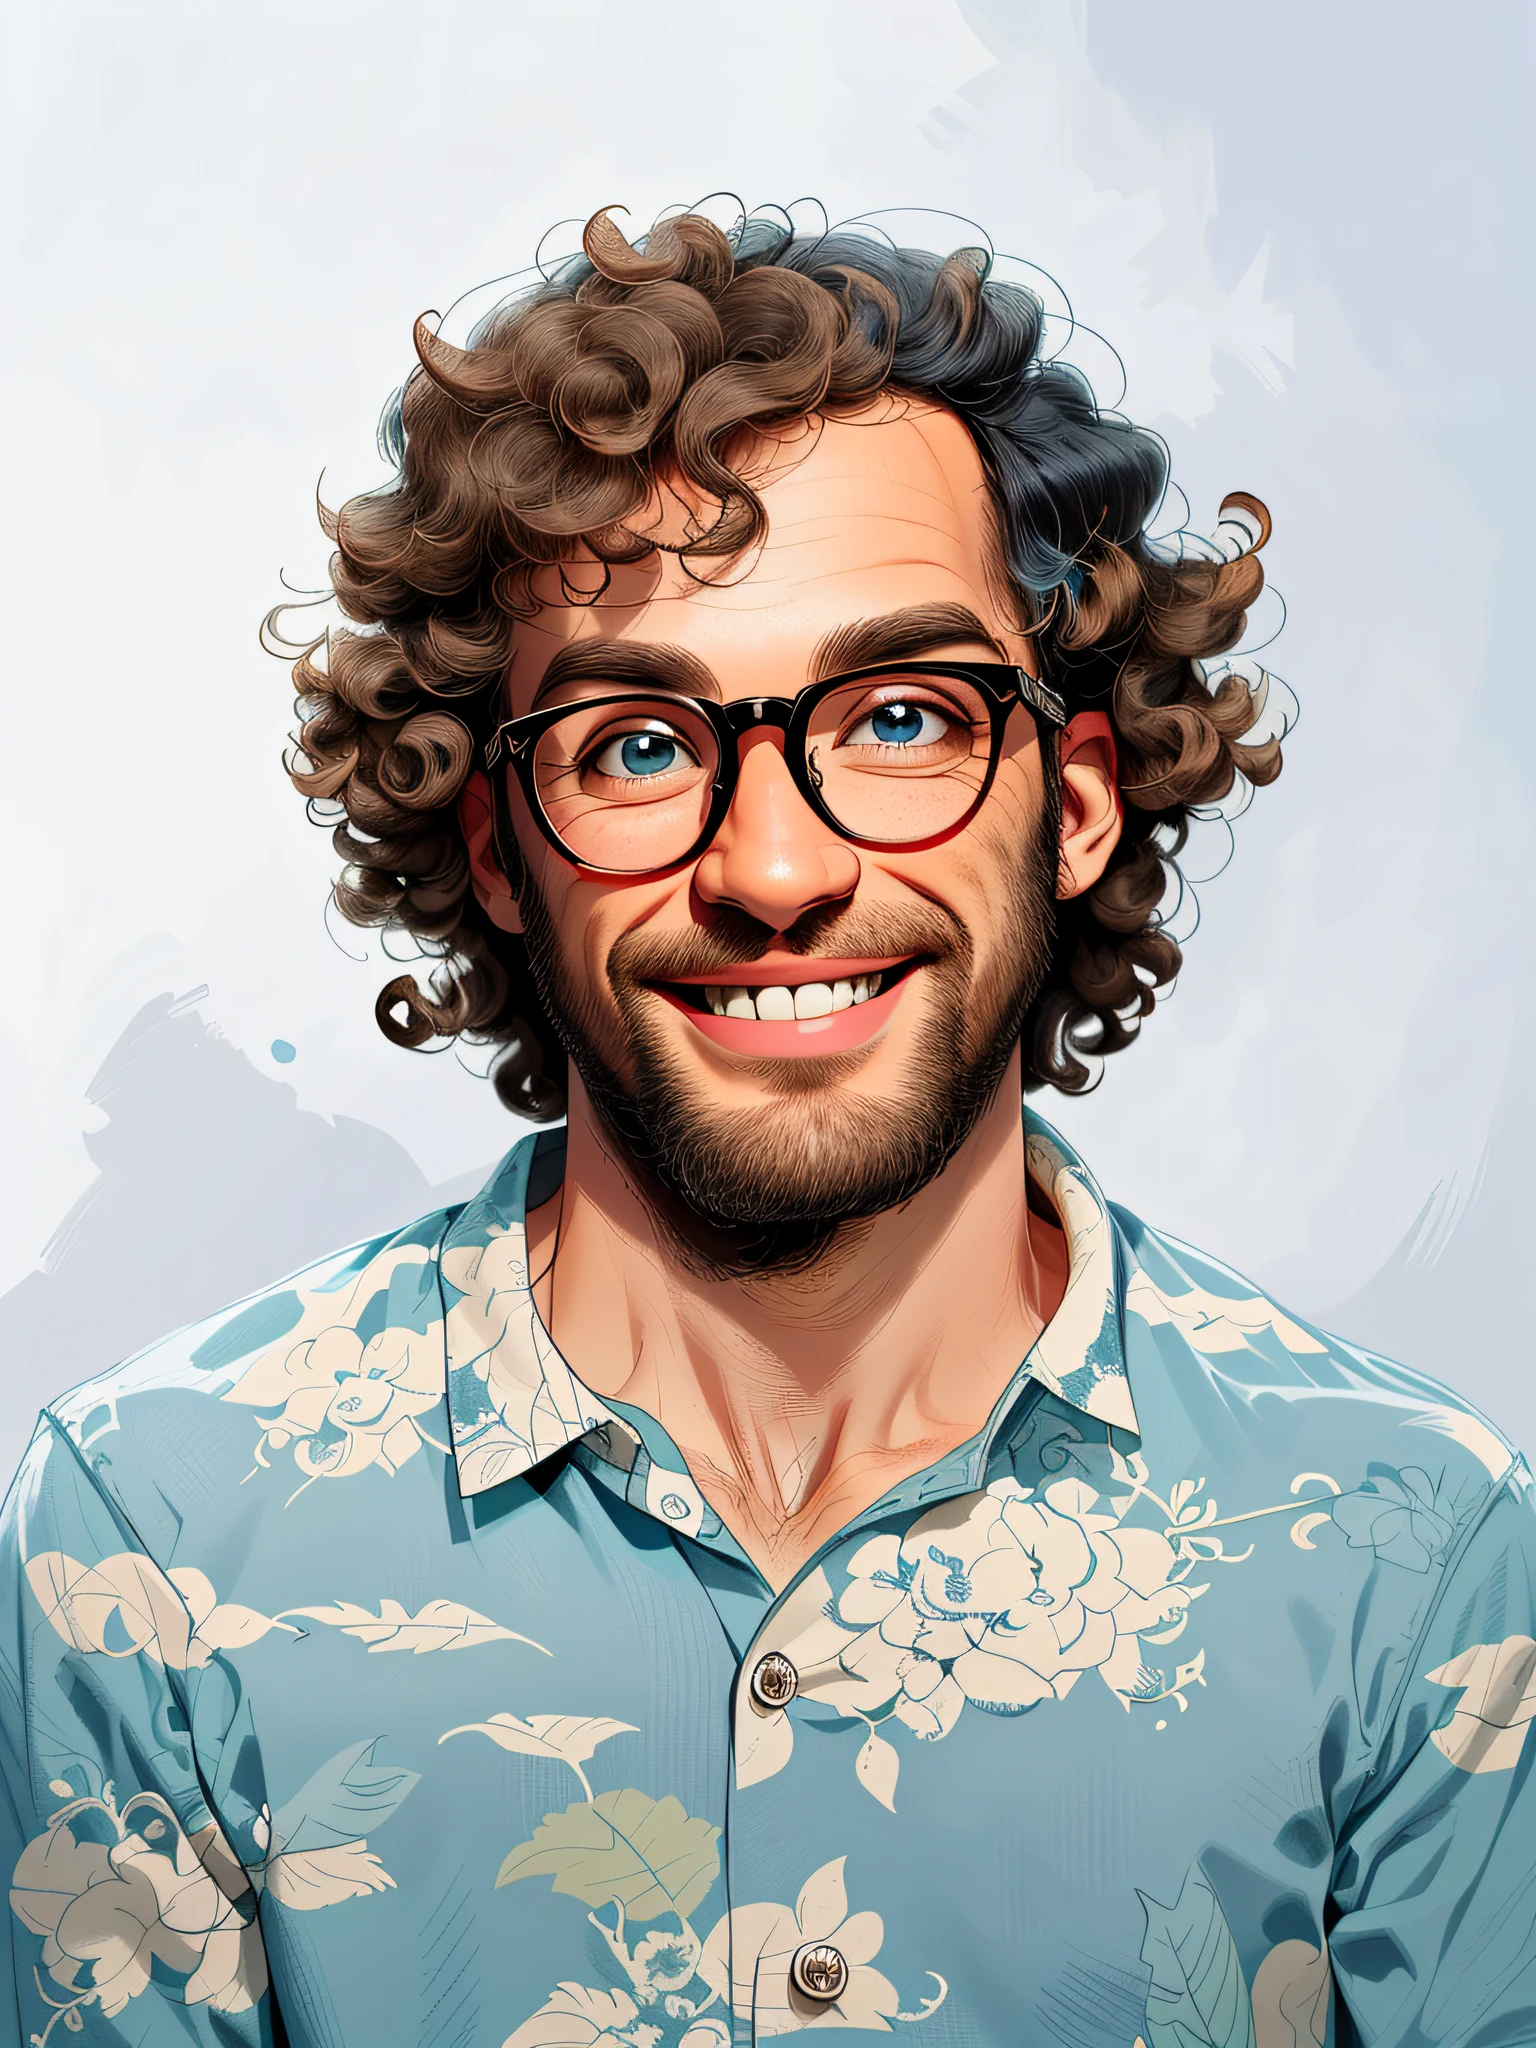 HD, (Best Detail), (Best Quality), Meticulous Facial Features, Smiling Man with Curly Hair in Blue Shirt and Glasses, Two-dimensional, Cartoon